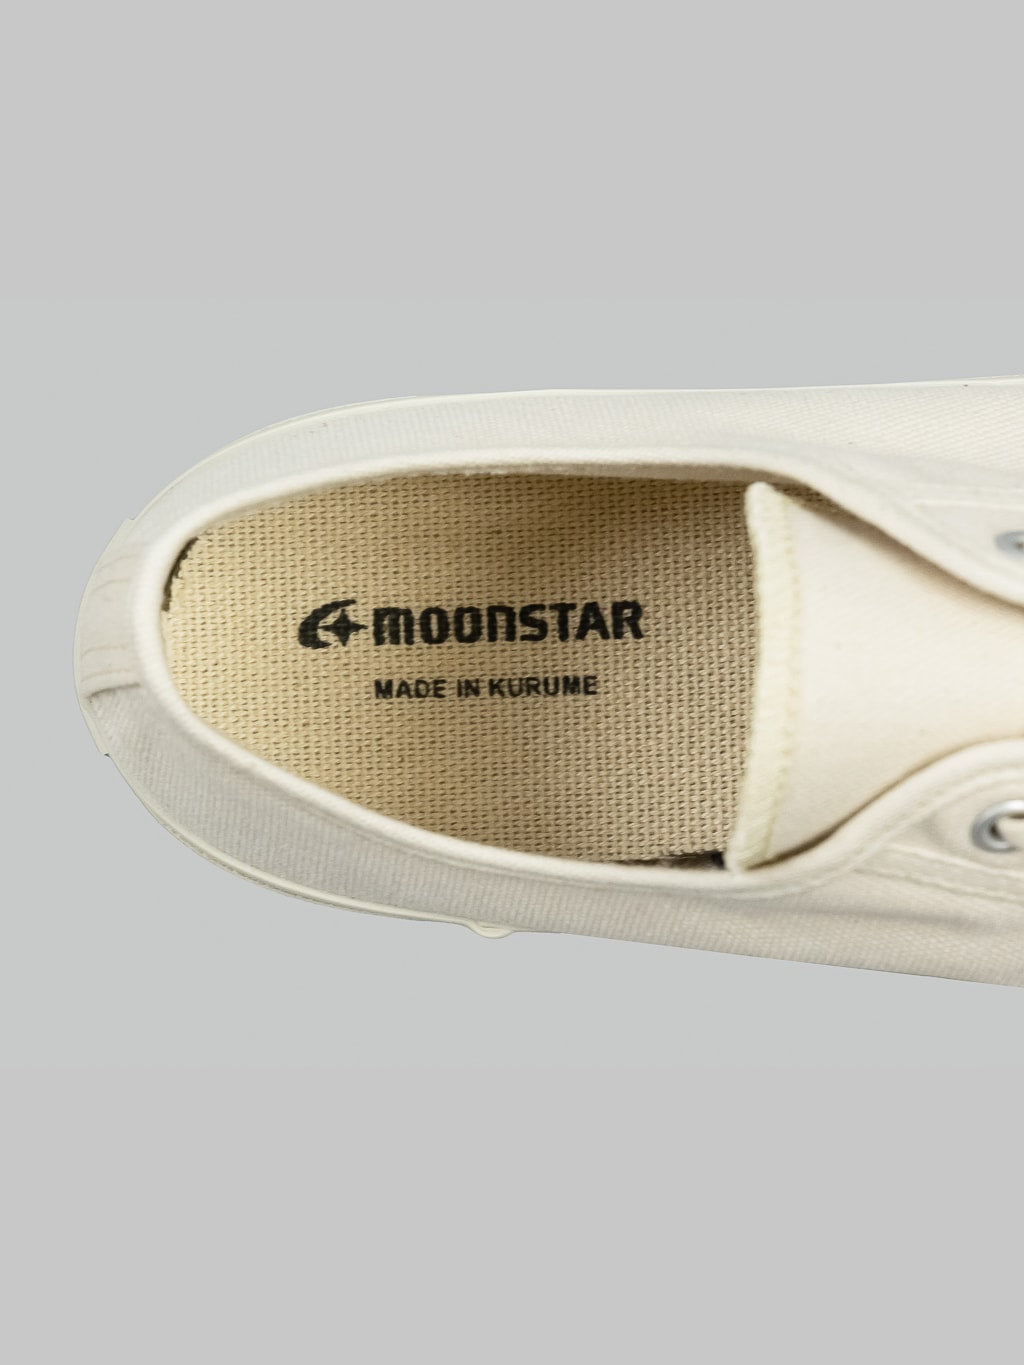 Moonstar Gym Classic White Sneakers interior insole